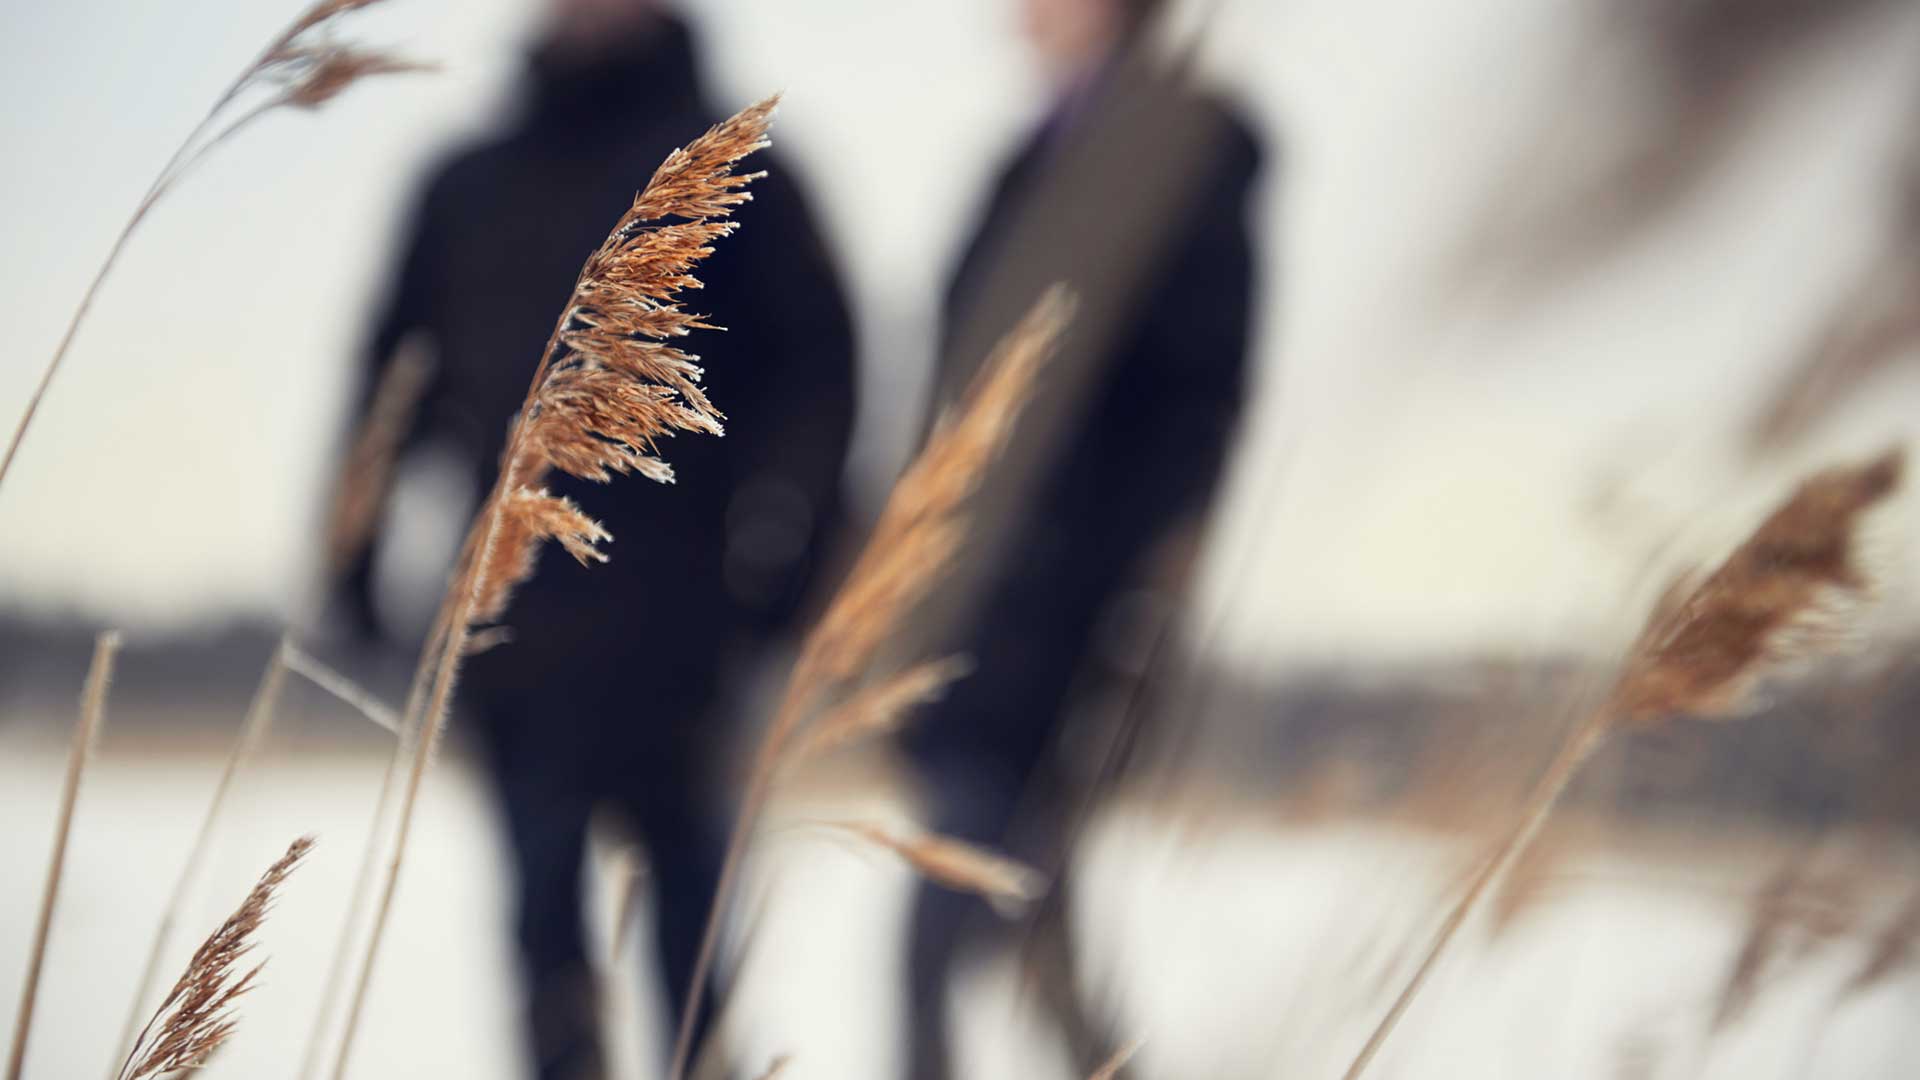 Close-up of frosty reeds close to a frozen lake with two people dressed in black in the background.